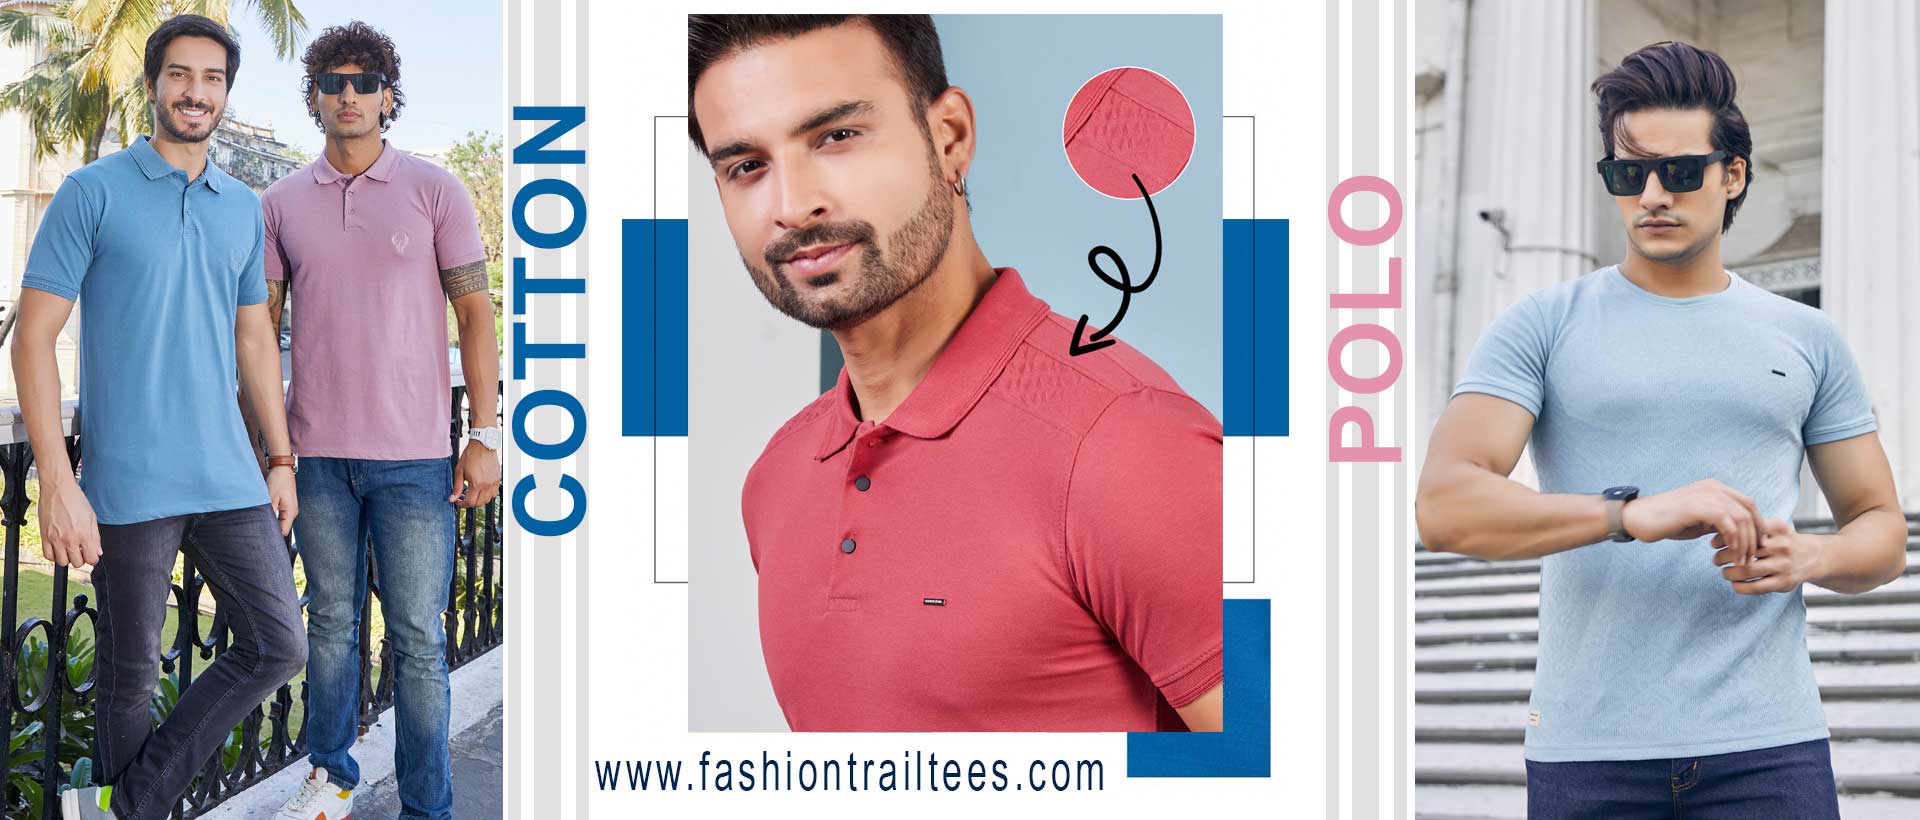 Polo Tshirts Cotton Polo Tees manufacturers India Printed Stripped T-shirts for Men exporter Ludhiana Punjab